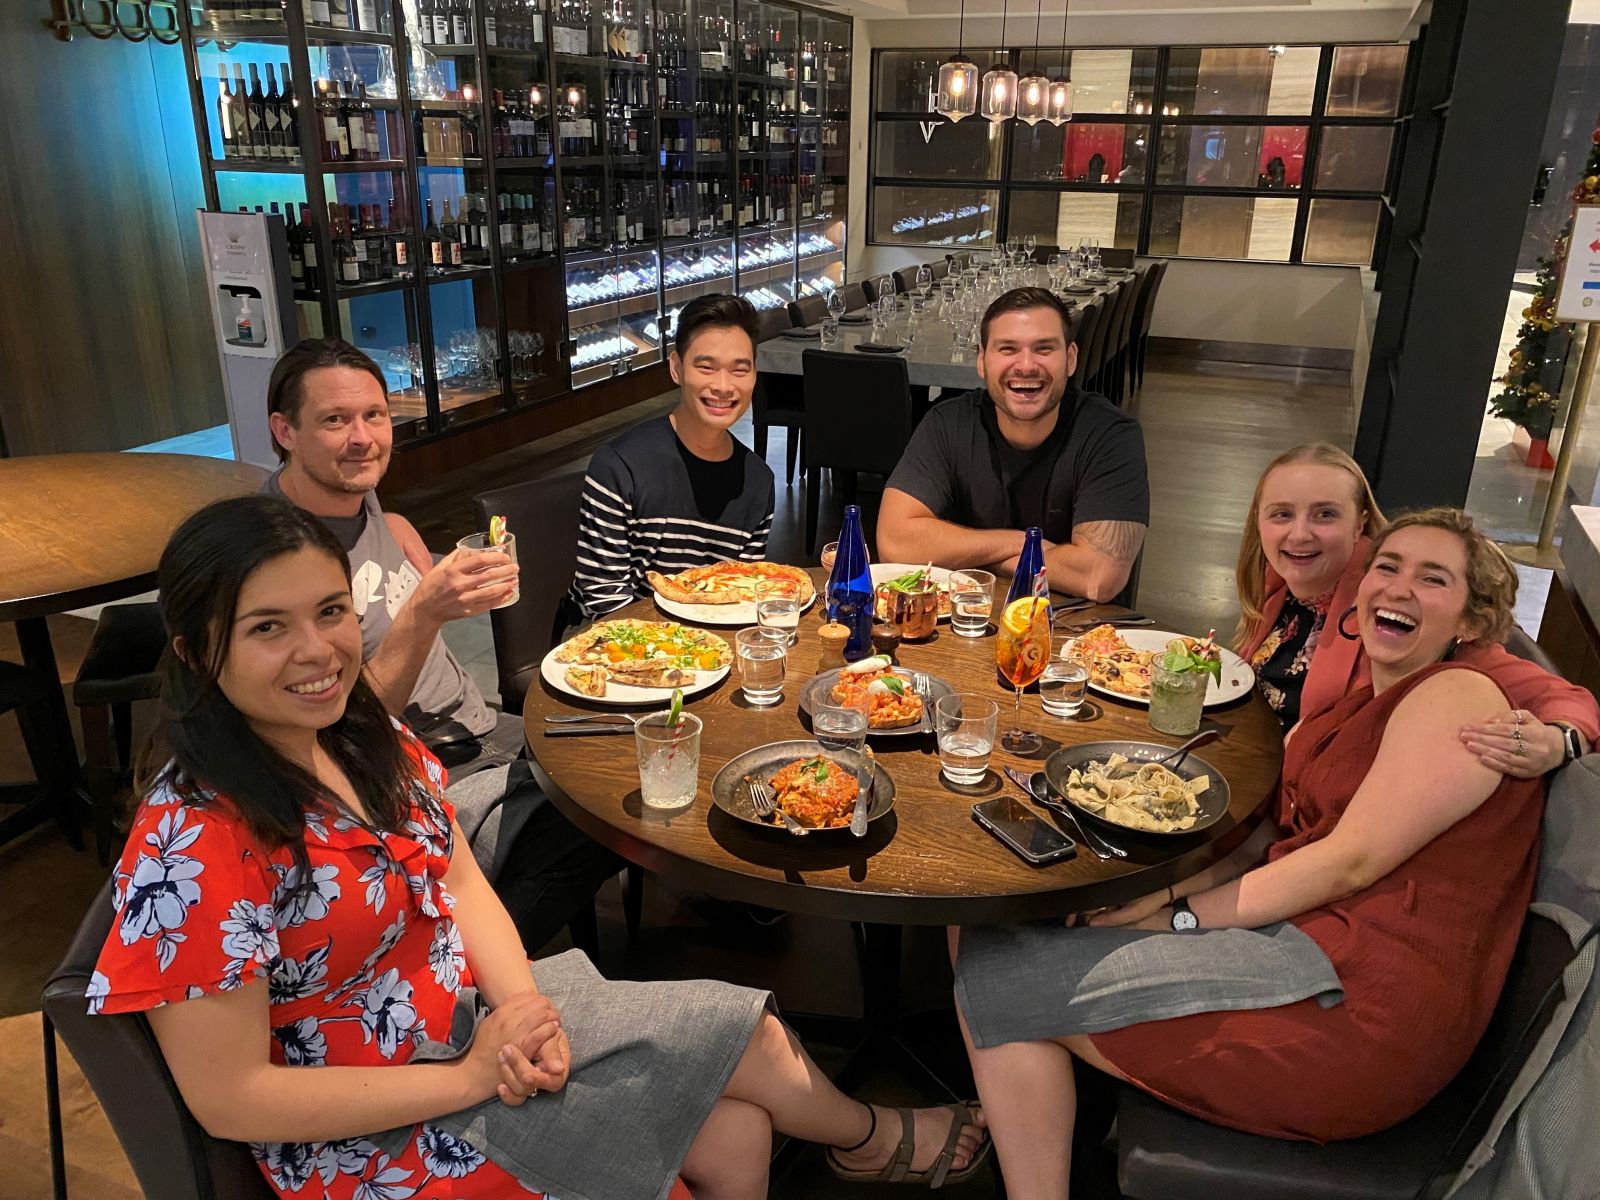 Cassandra Embling (2nd from right) and Mladen Jovanovic (3rd from right) at an end-of-year dinner with BindiMaps' team members (Source: BindiMaps)